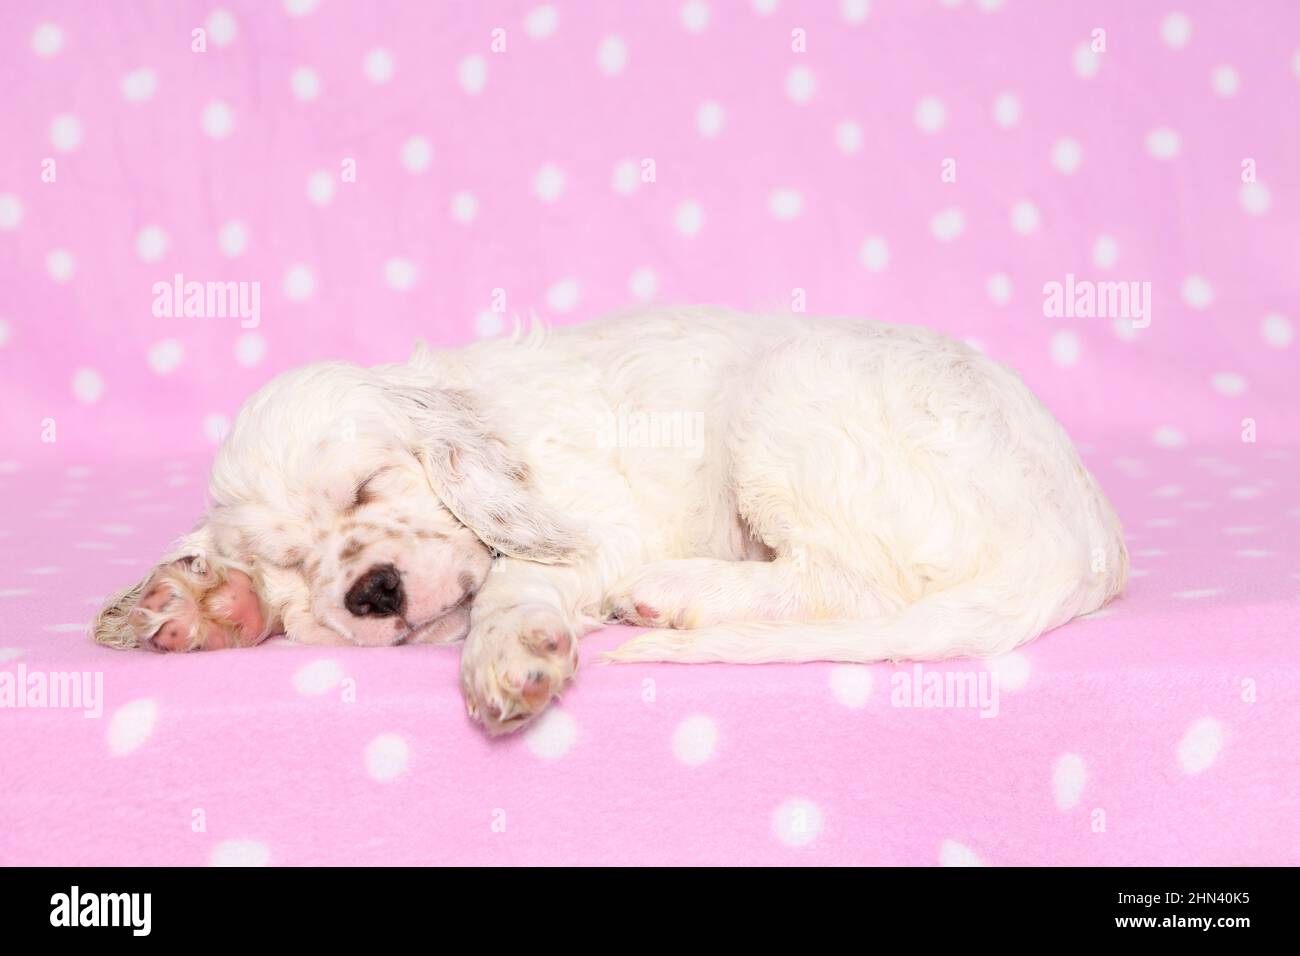 English Setter. Puppy sleeping on a pink blanket with polka dots. Germany Stock Photo